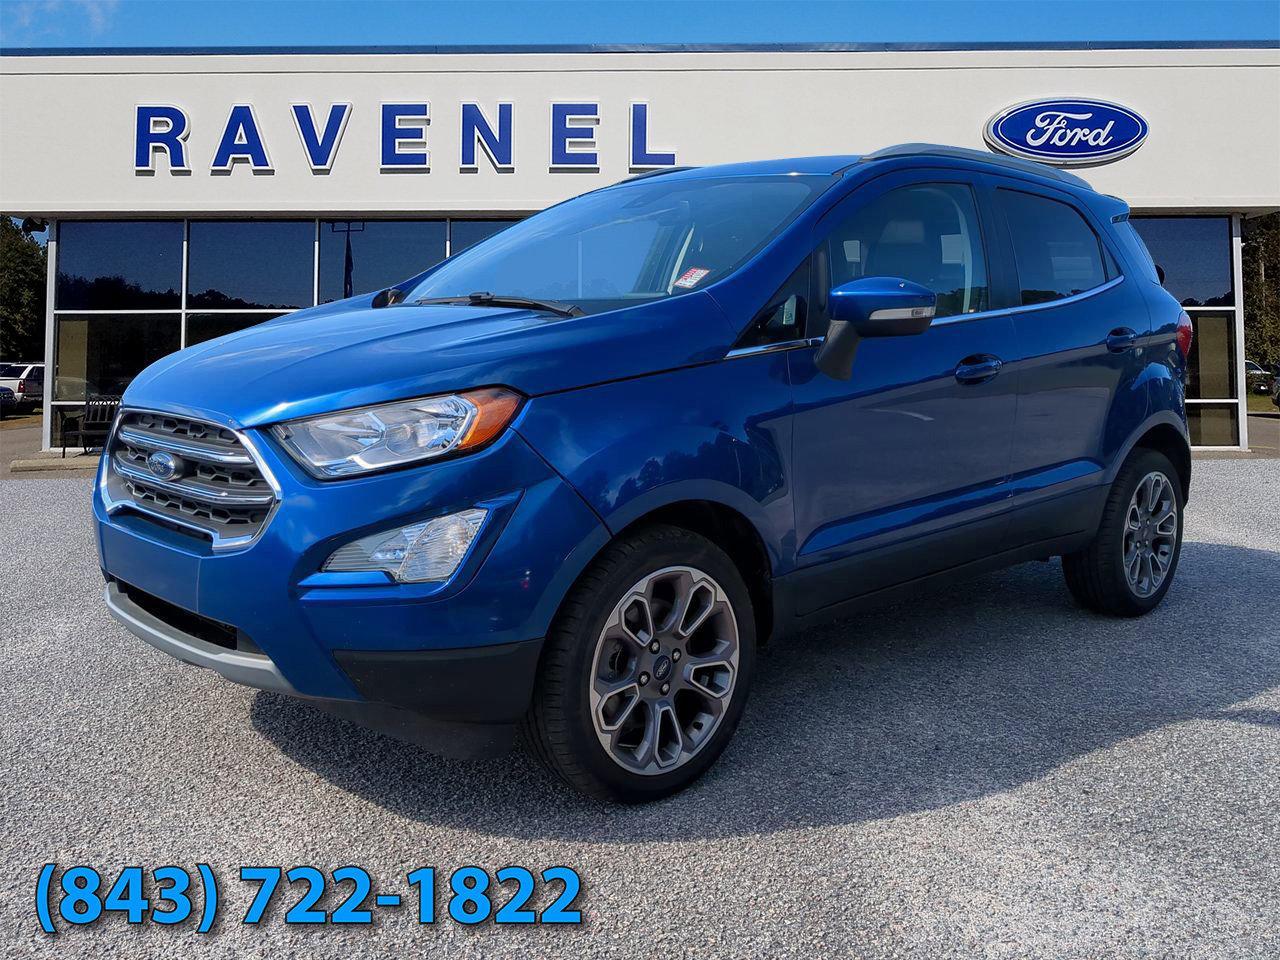 2021 used Ford EcoSport For Sale In Ravenel, SC